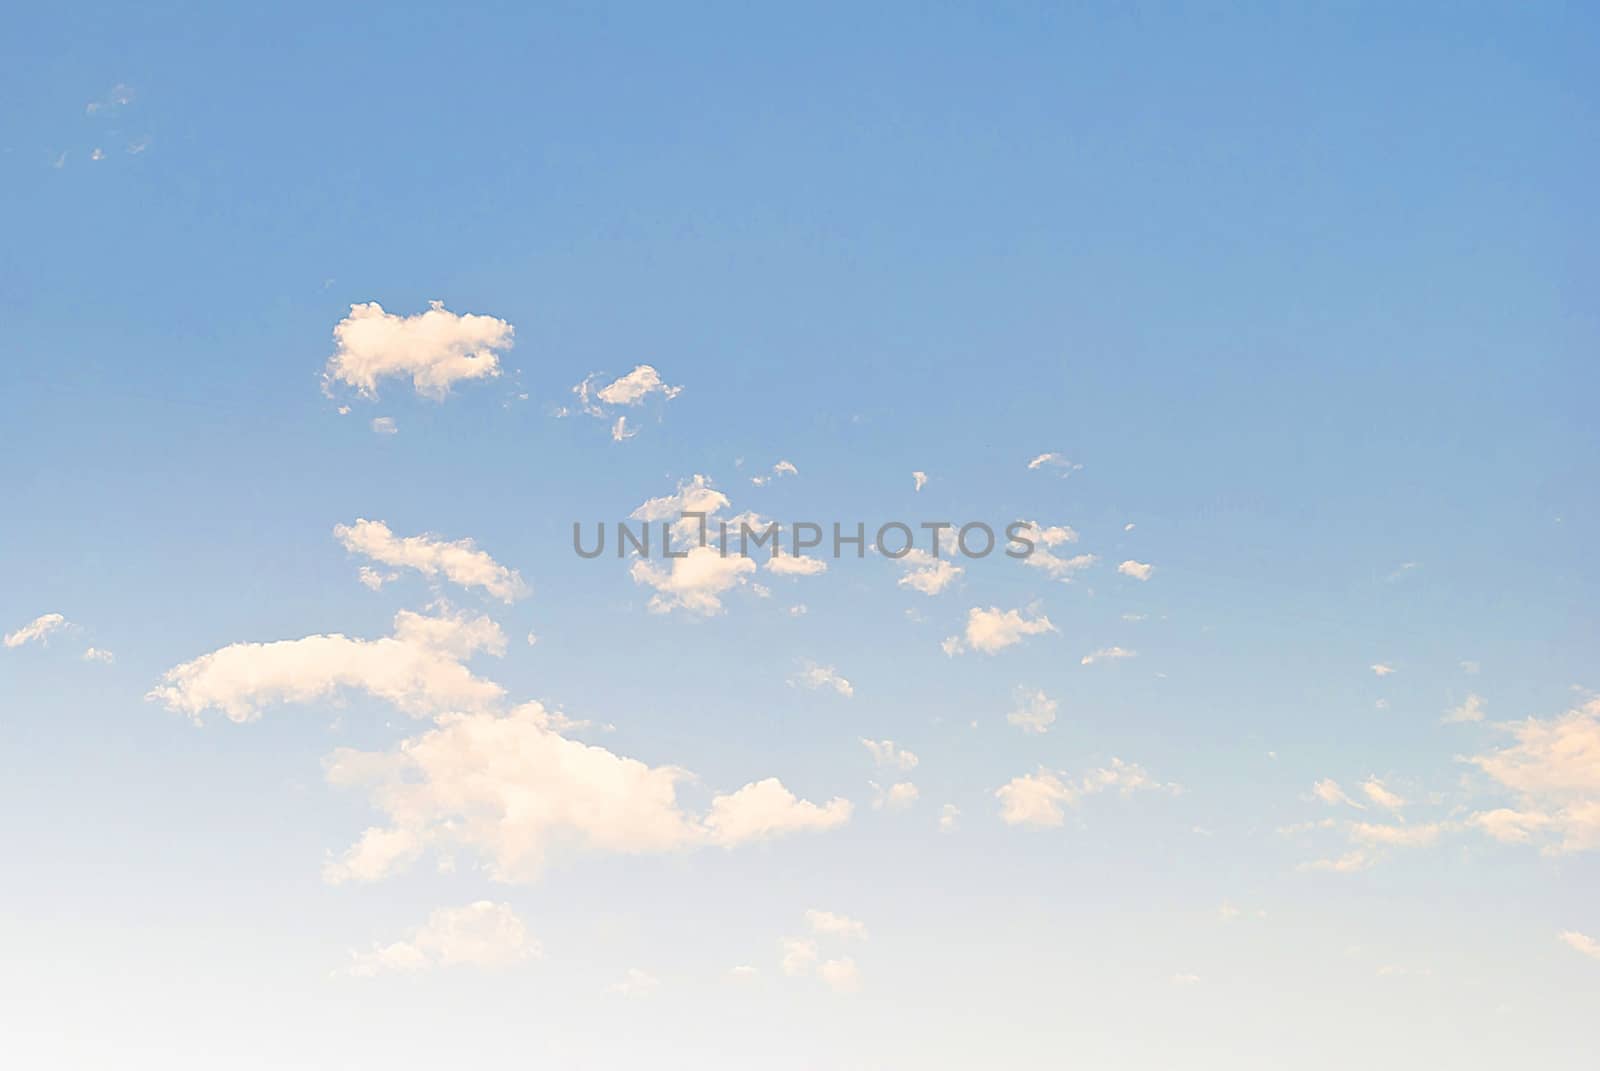 blue sky and white clouds by rakoptonLPN